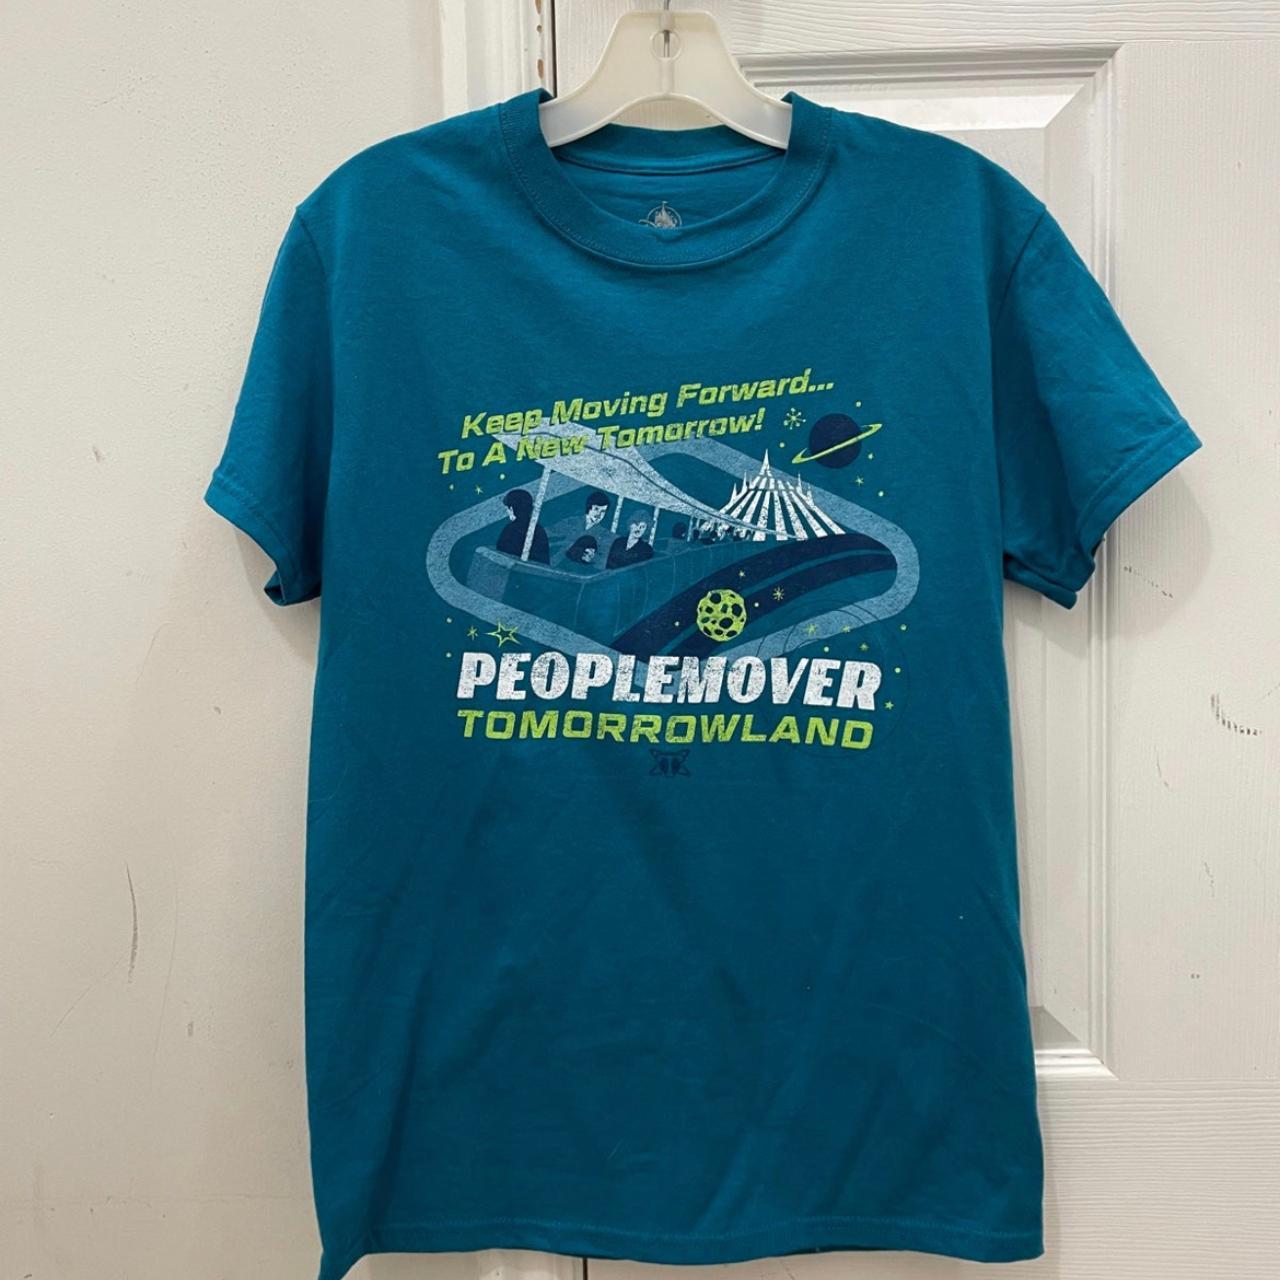 Tomorrowland people mover shirt! This is a fun shirt... - Depop